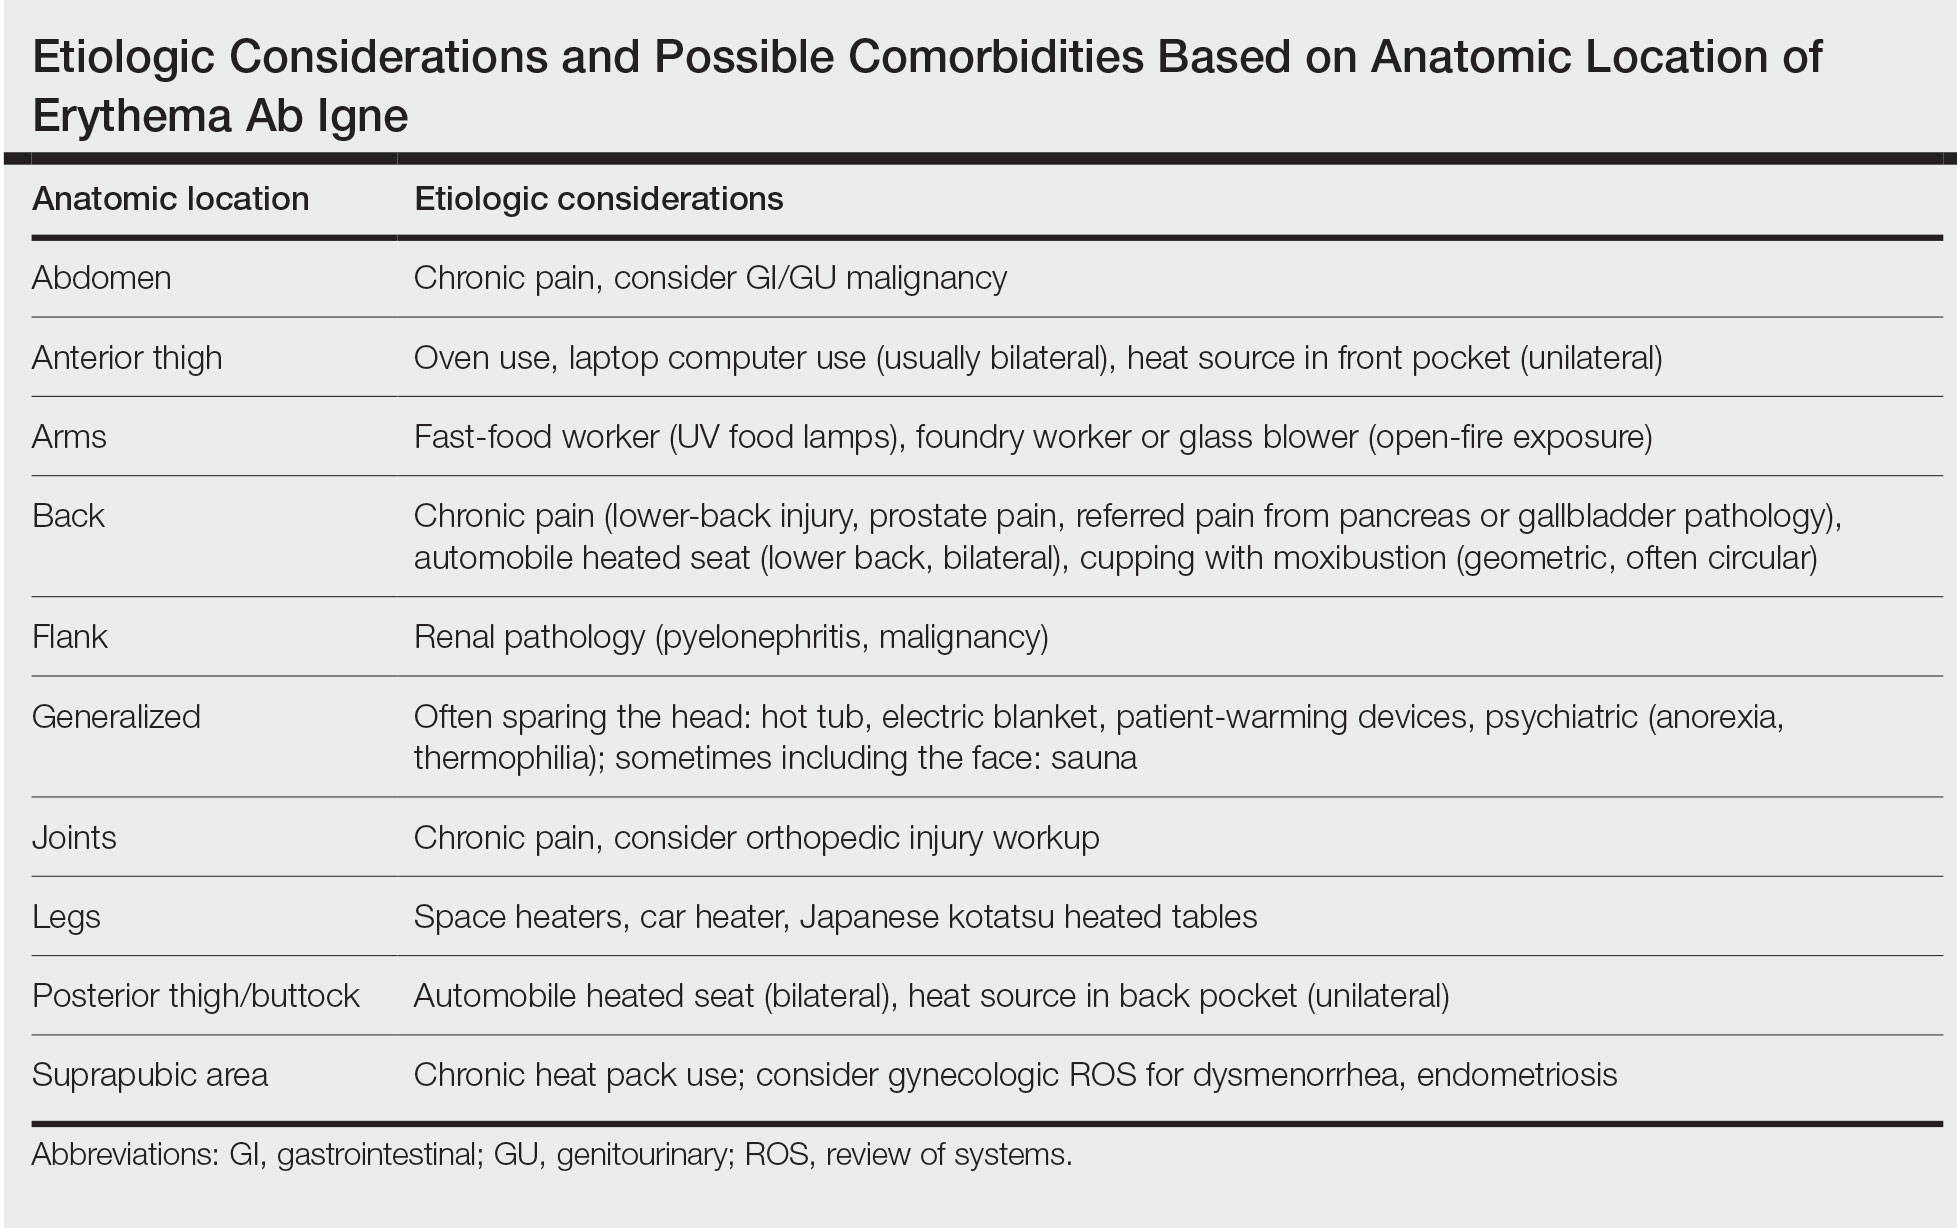 Etiologic Considerations and Possible Comorbidities Based on Anatomic Location of Erythema Ab Igne